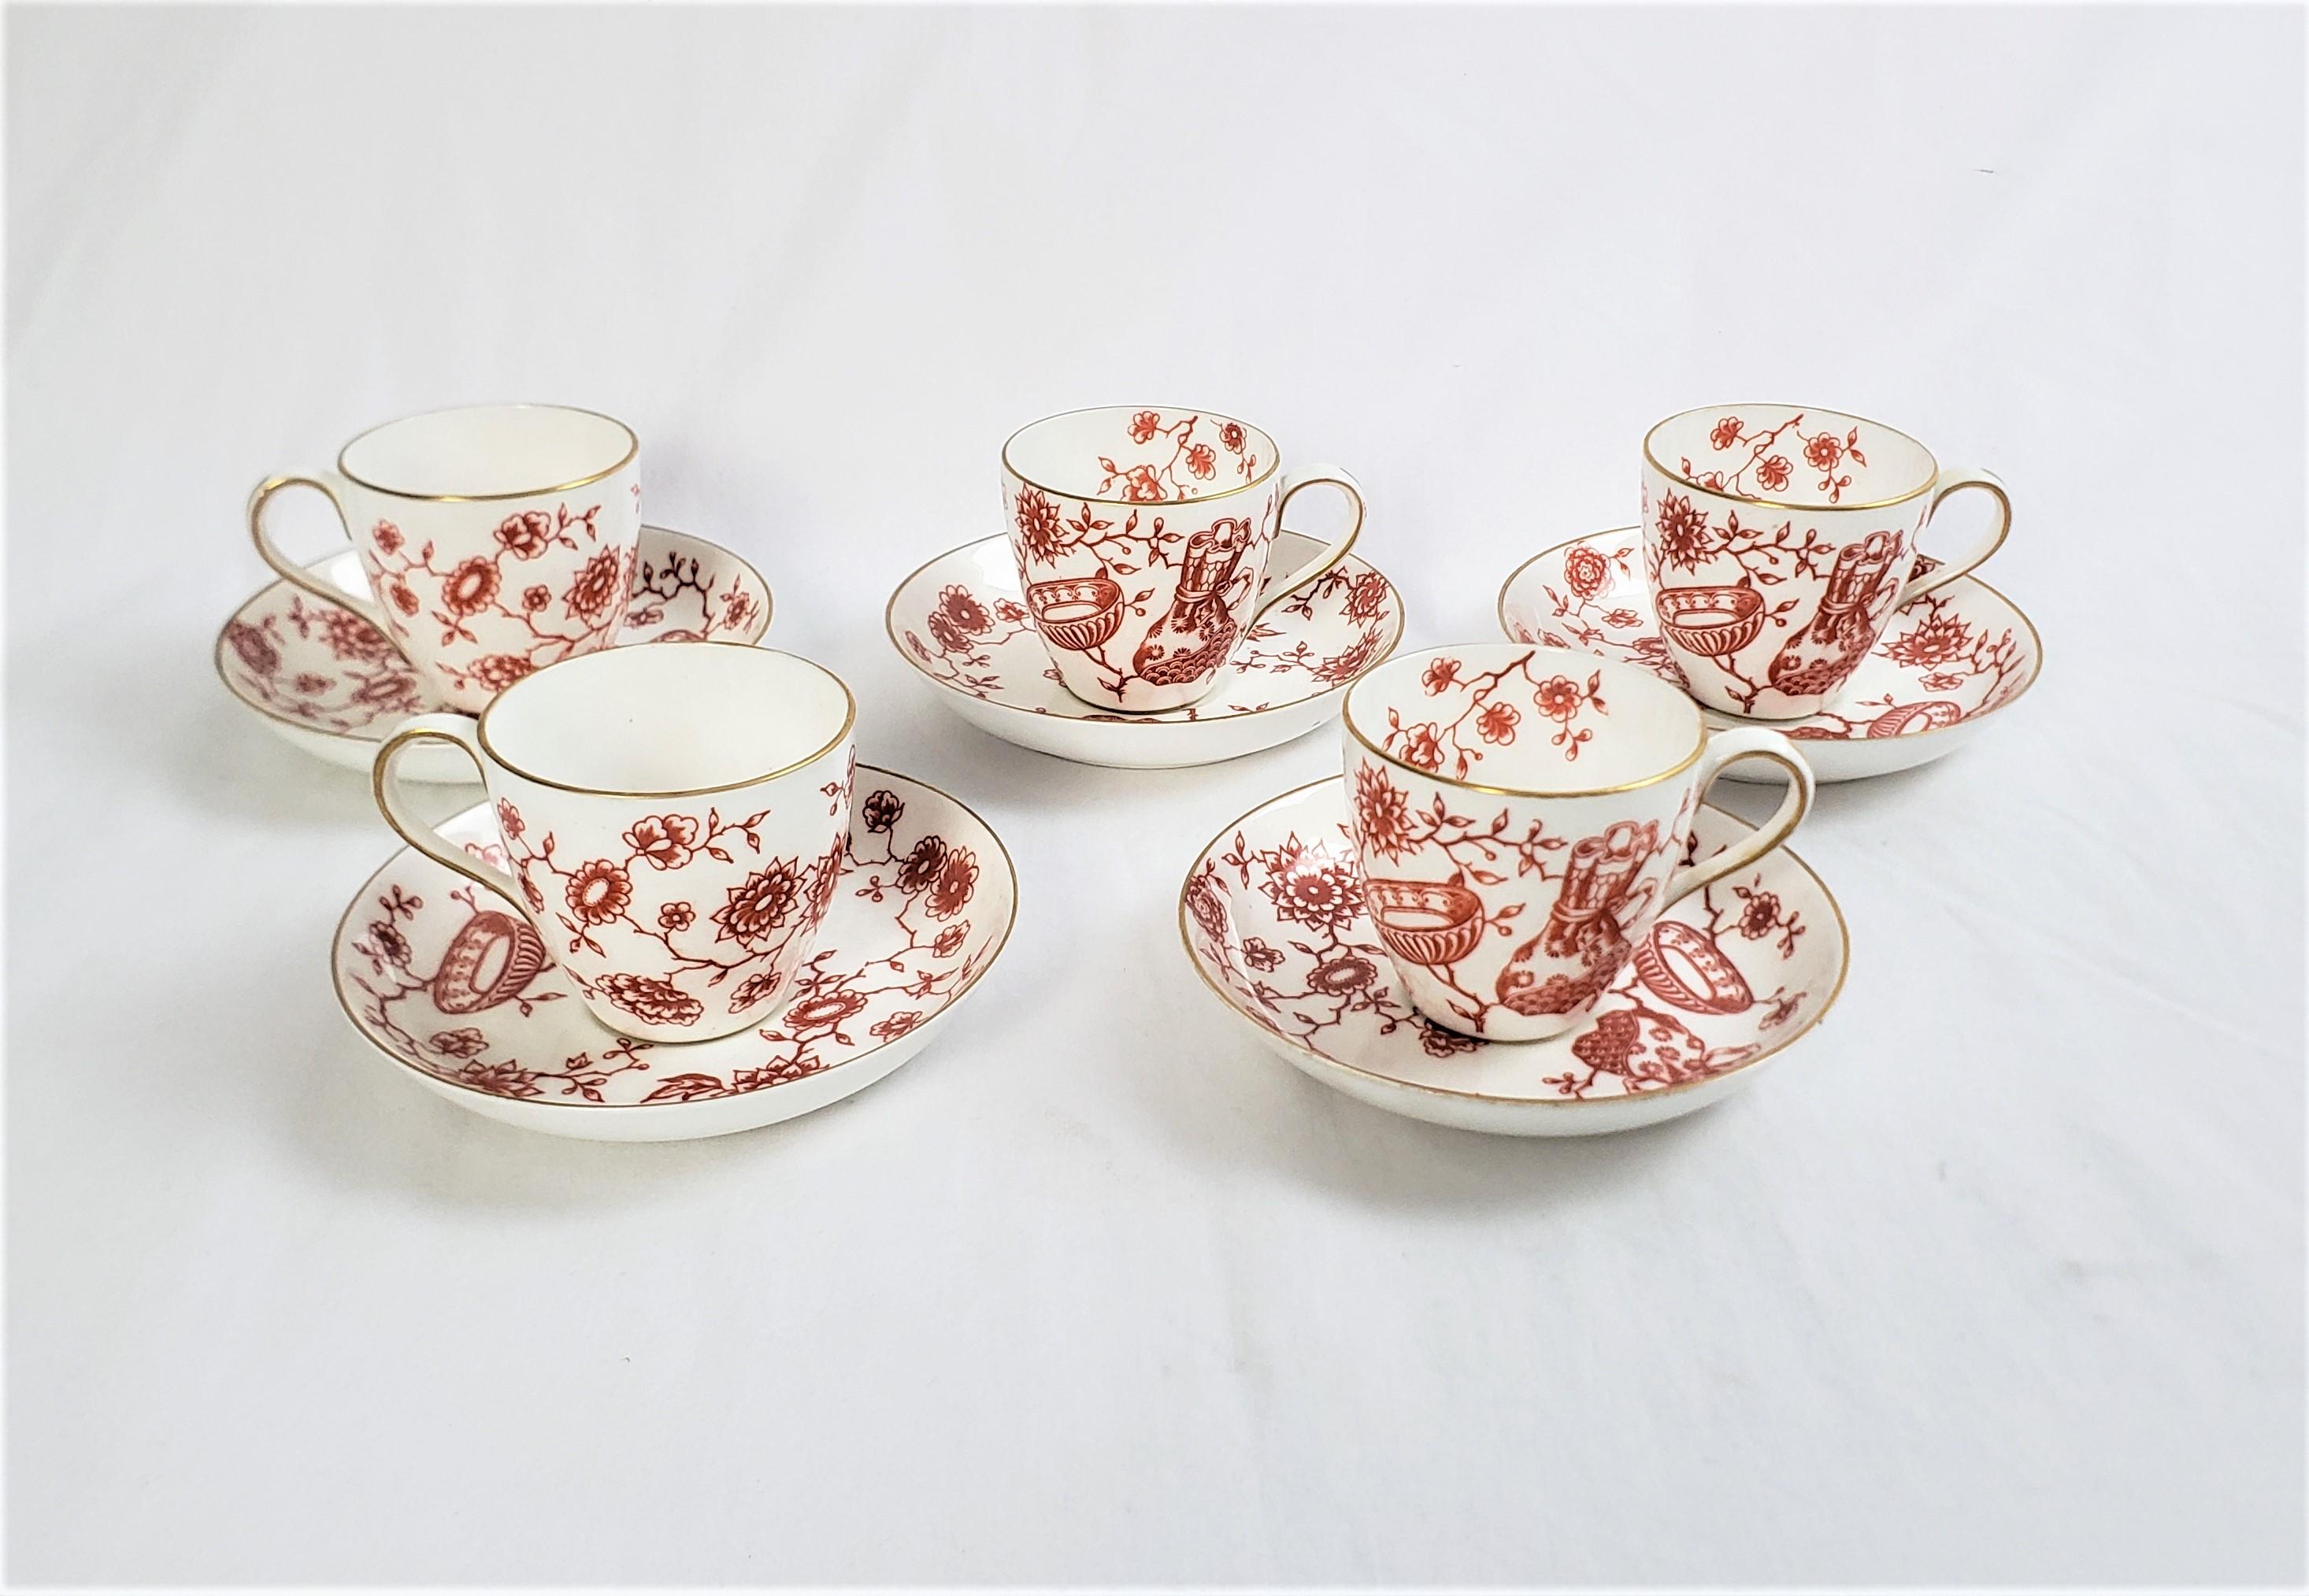 These five small cup and saucer sets, and one additional saucer, were made by the well known Royal Crown Derby maker of England and date to approximately 1850 and done in the period Chinoiserie style. These cup and saucer sets are composed of